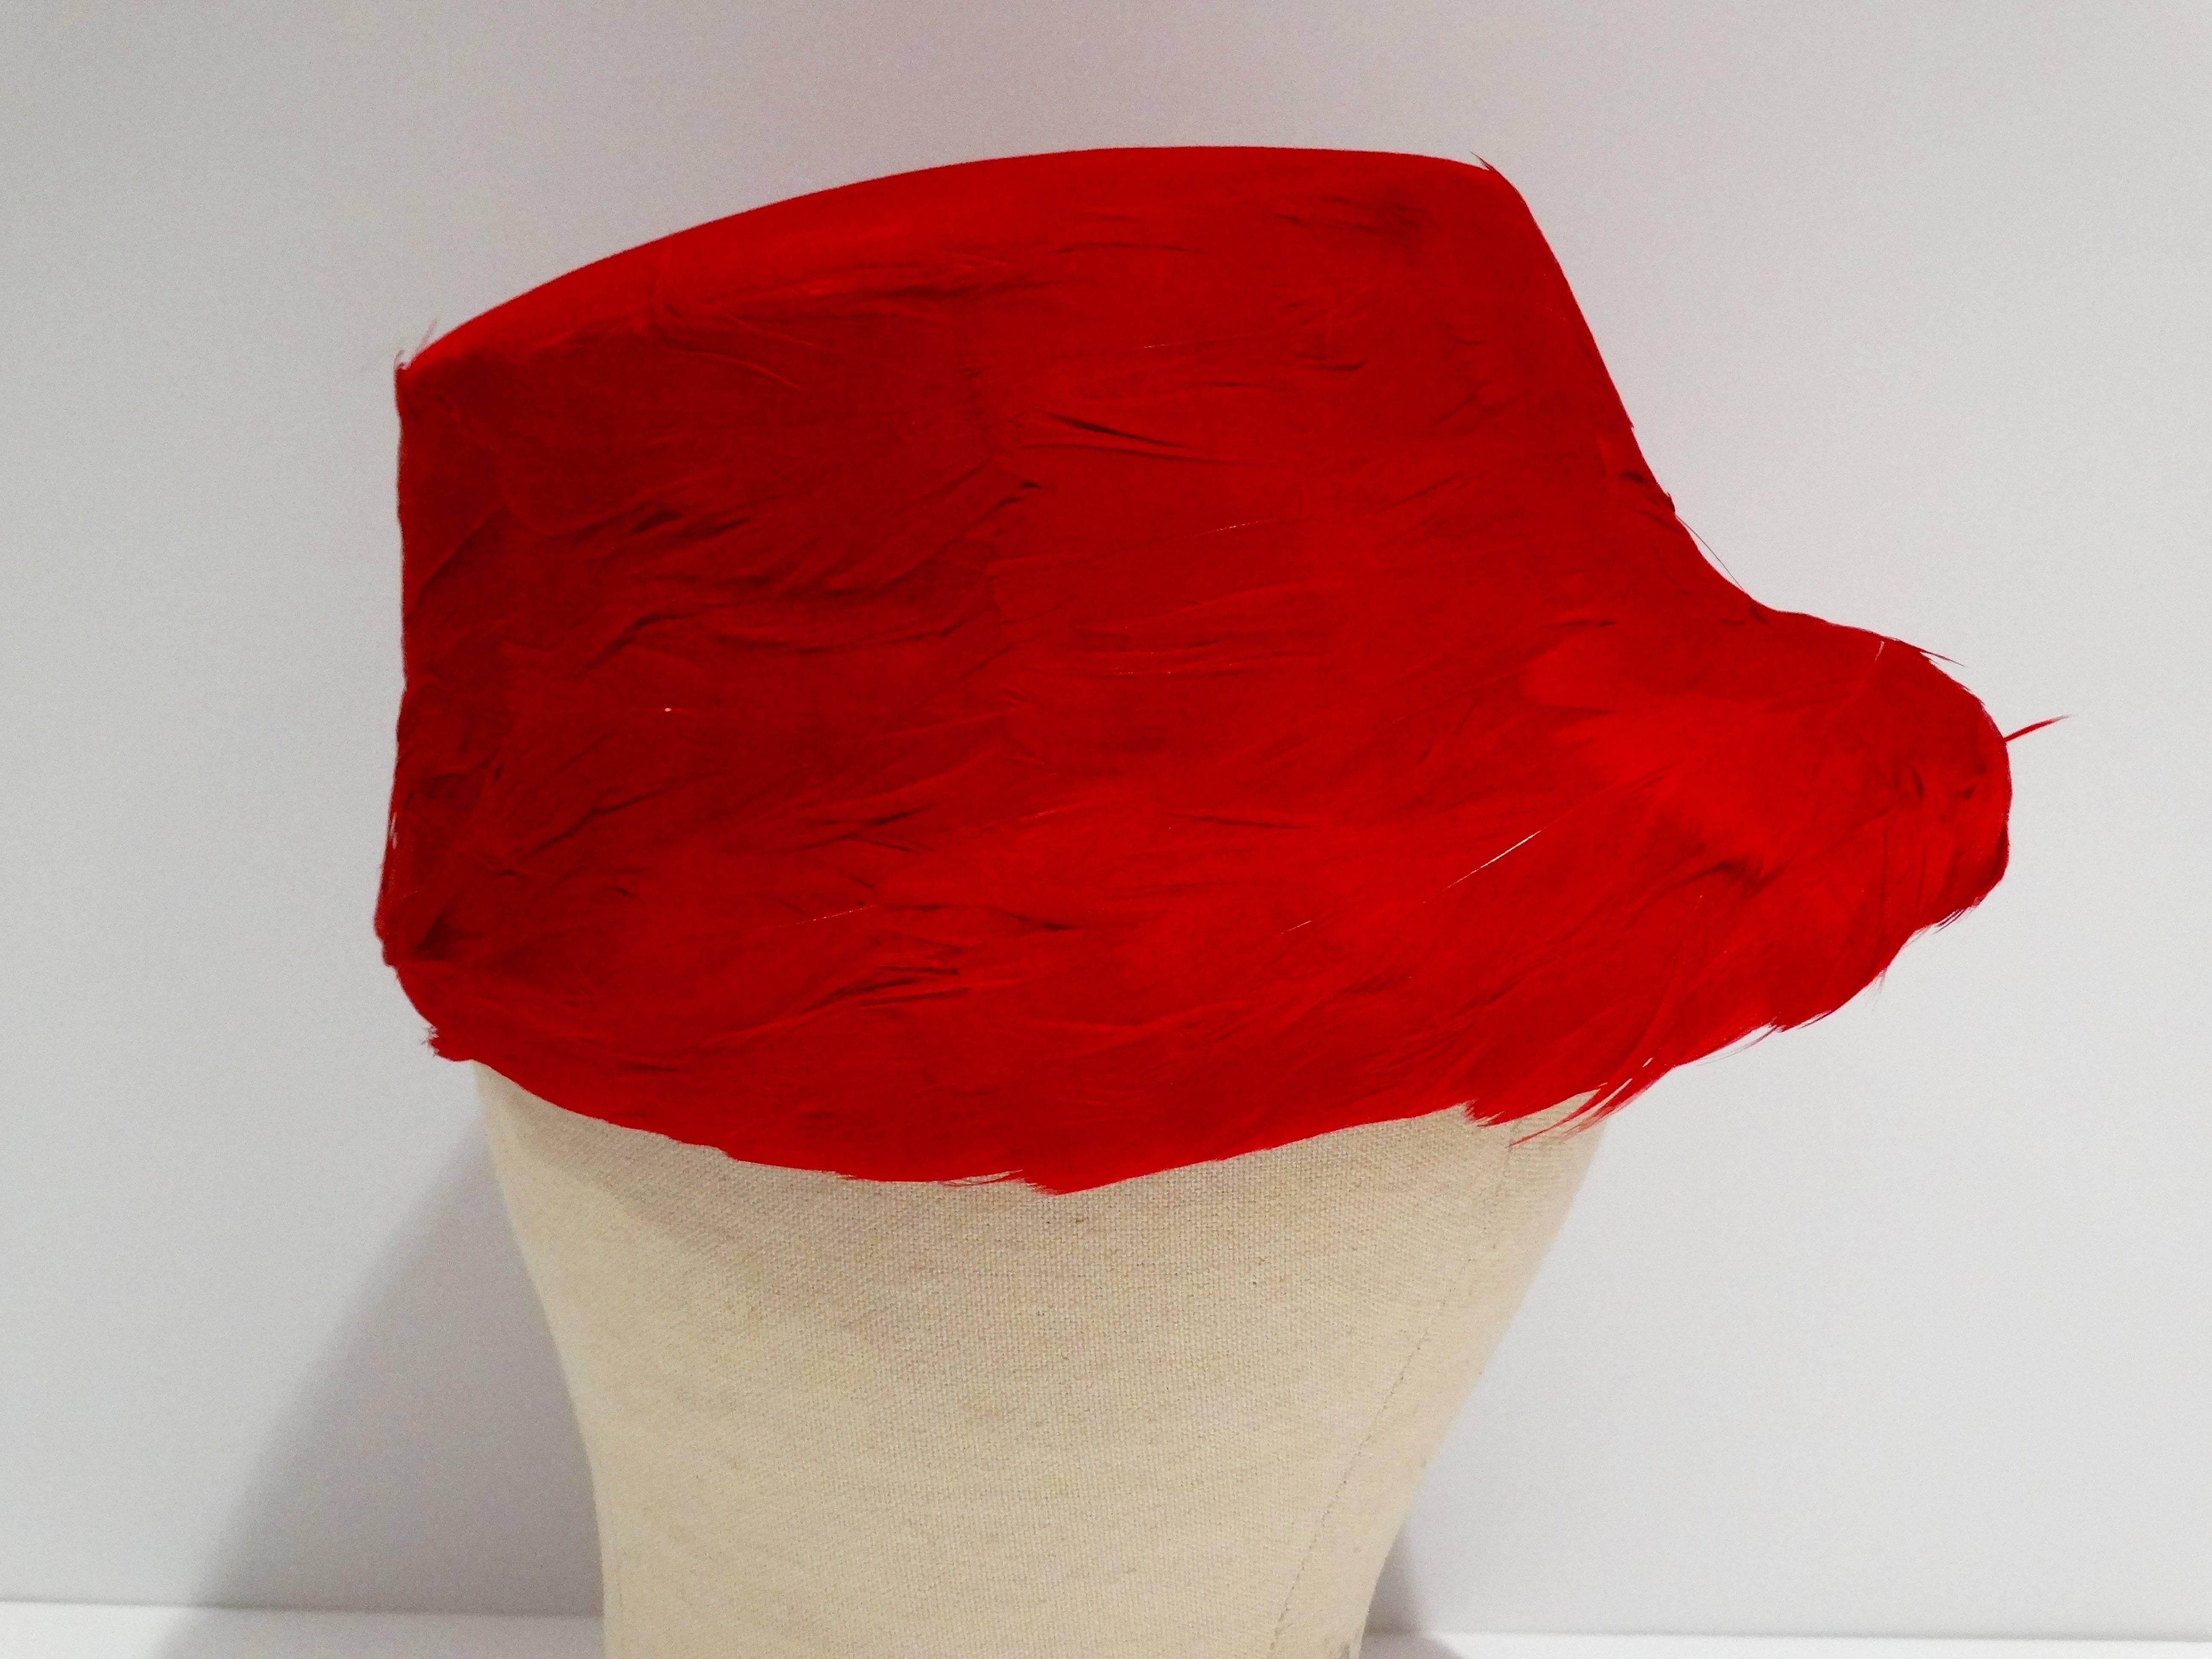 Sassy 1950's Clover Lane feathered hat with felt top. In lipstick red, this hat is very avant guard and looks stunning on. In mint condition Size of the hat...across the top (not counting the brim) it measures 6 1/4